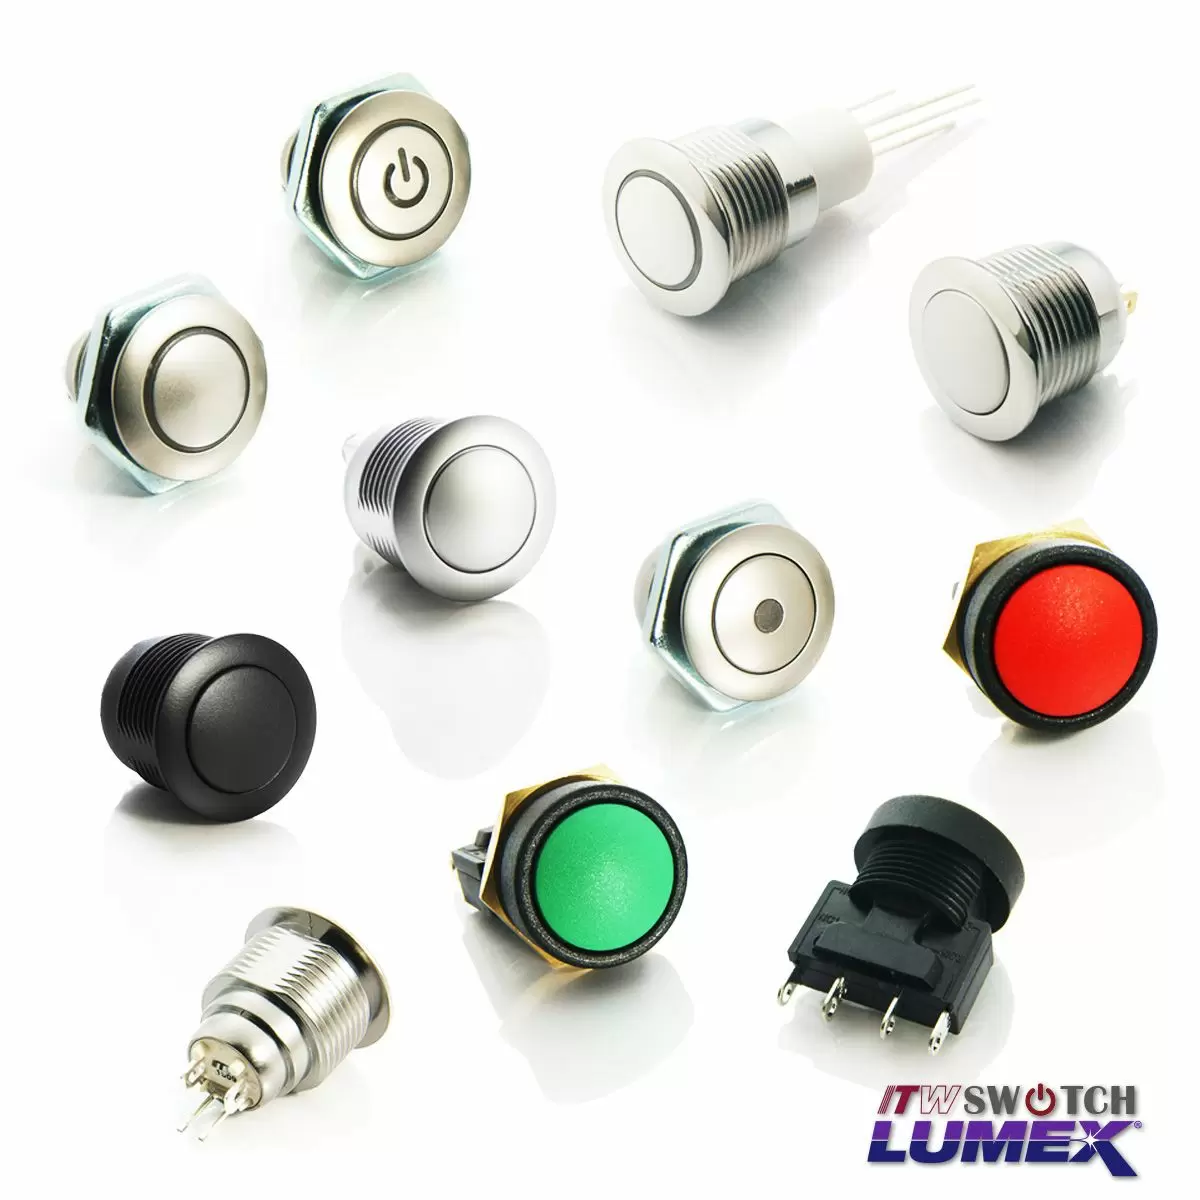 The push button switches from ITW Lumex Switch come in a range of designs, all of which are compatible with a 16mm panel cutout.